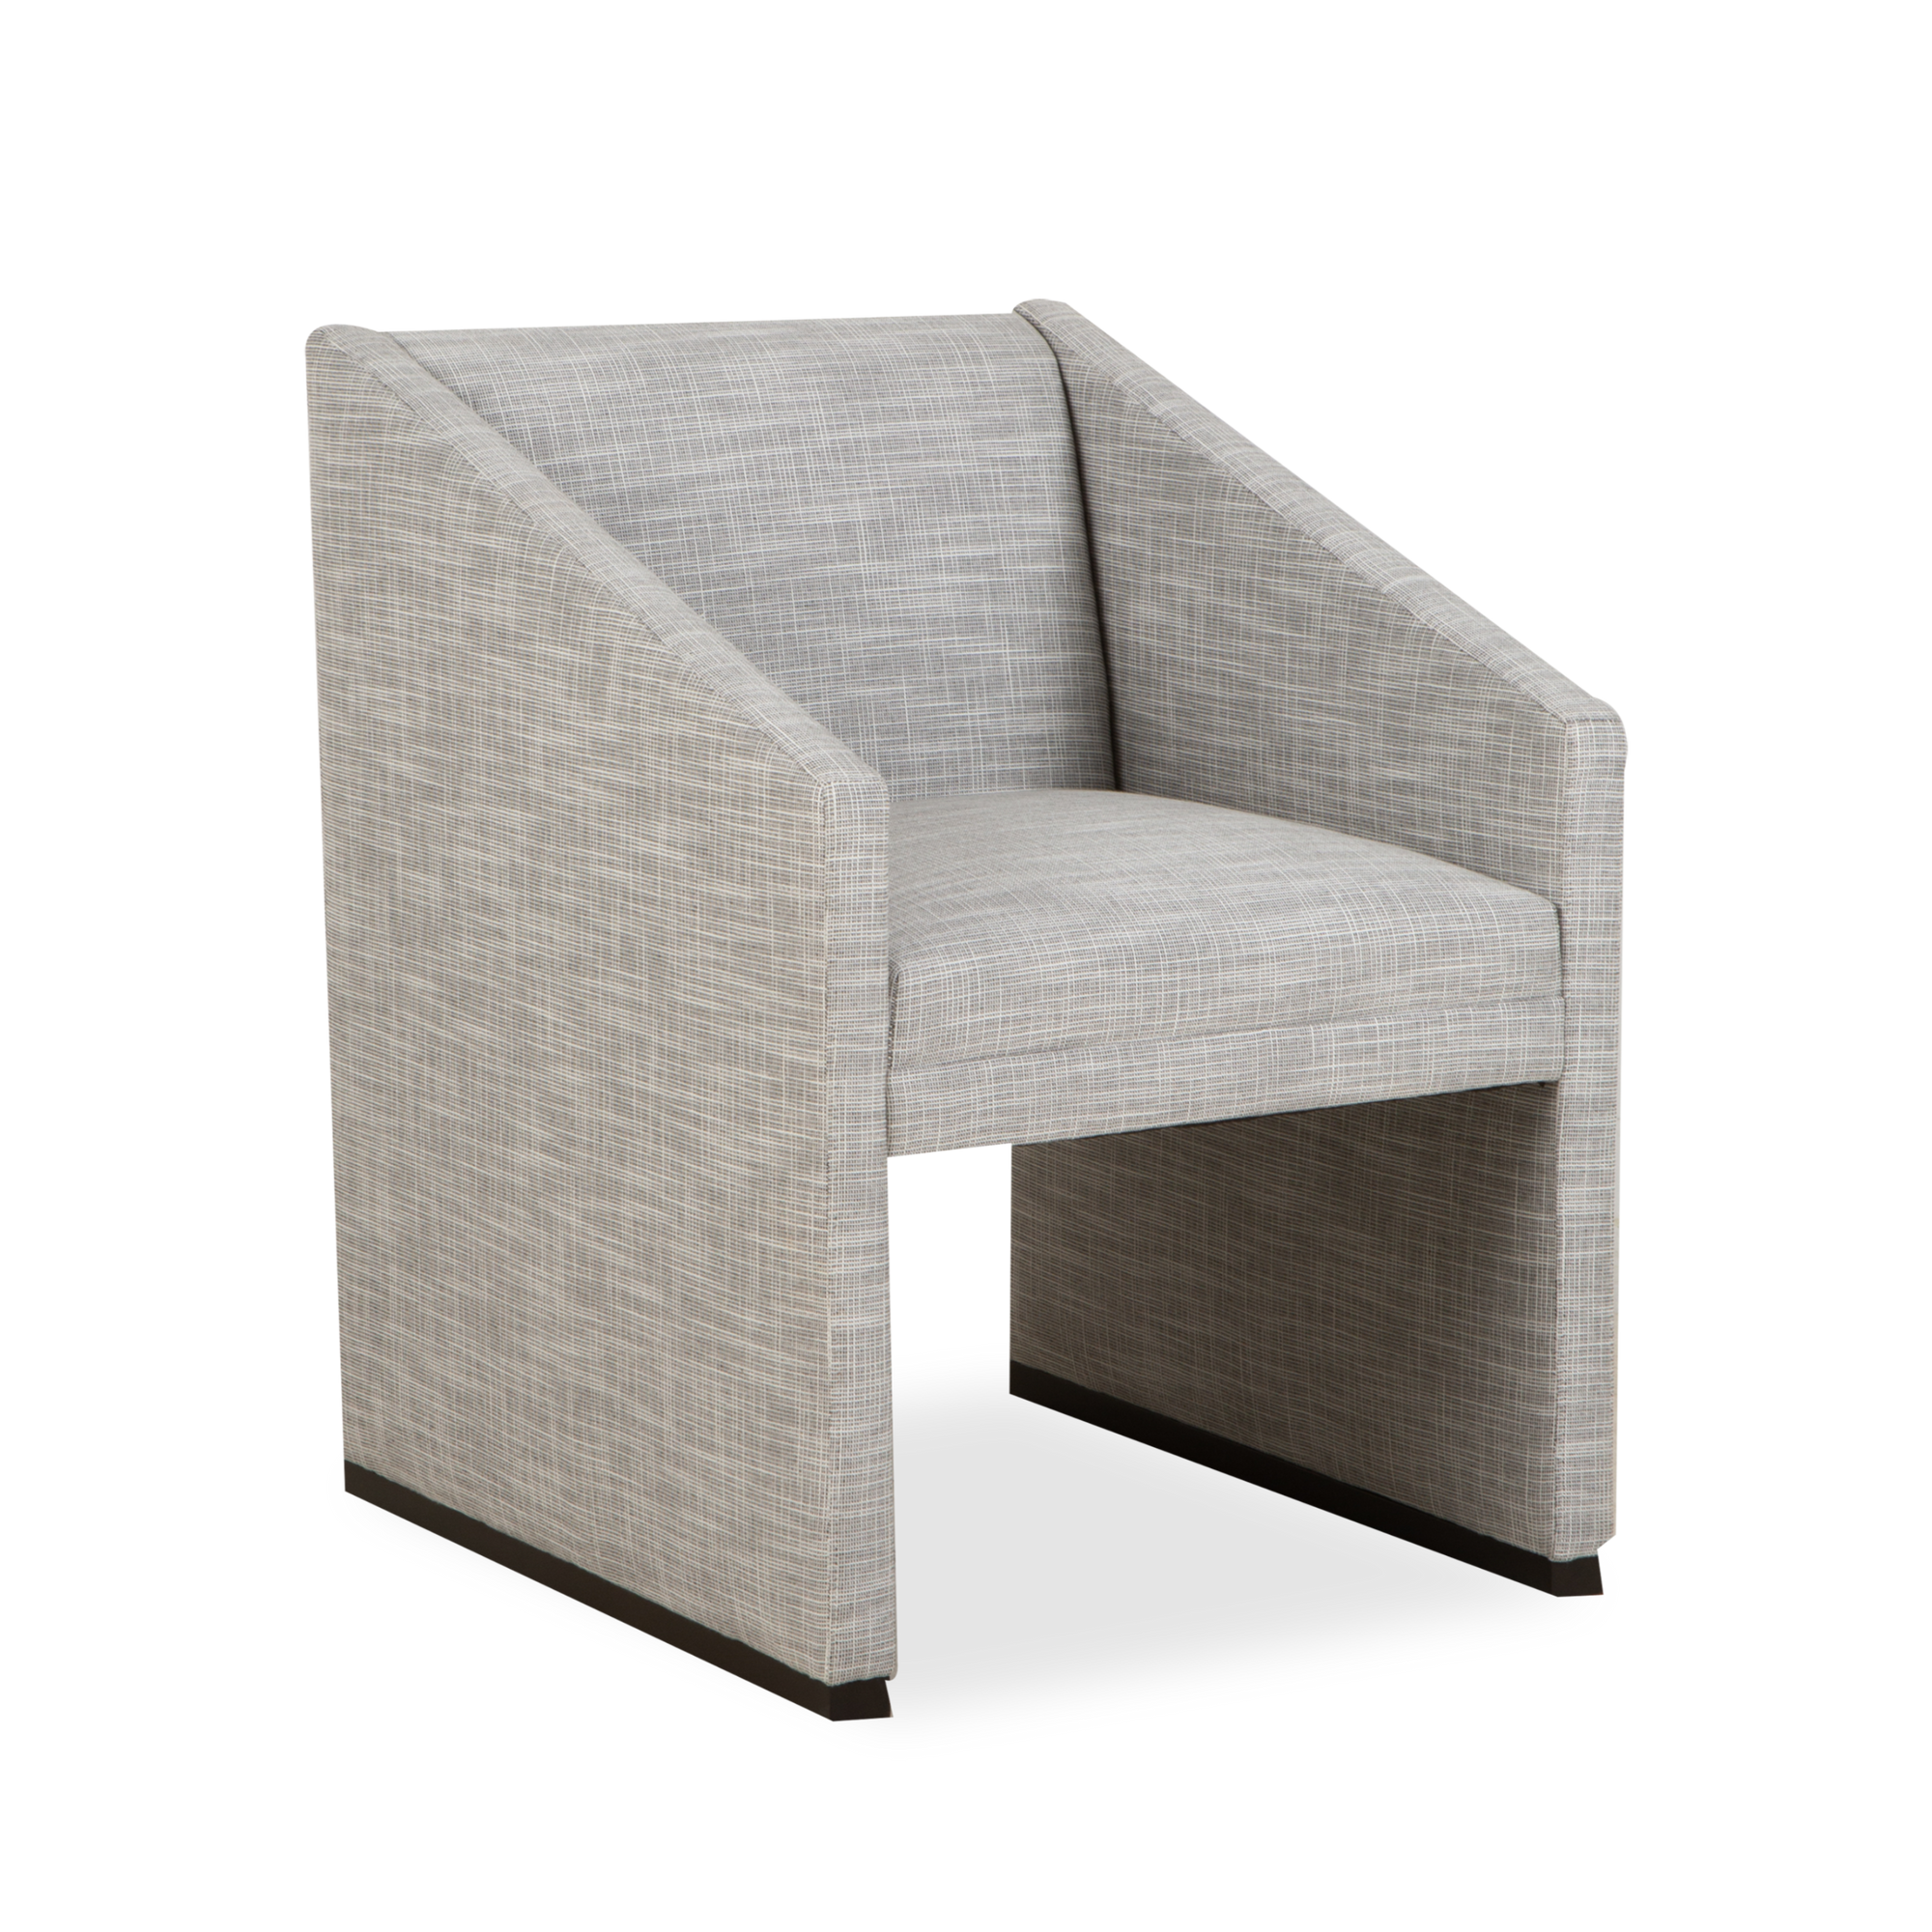 Boxy contours meets angled edges in the David Dining Chair.